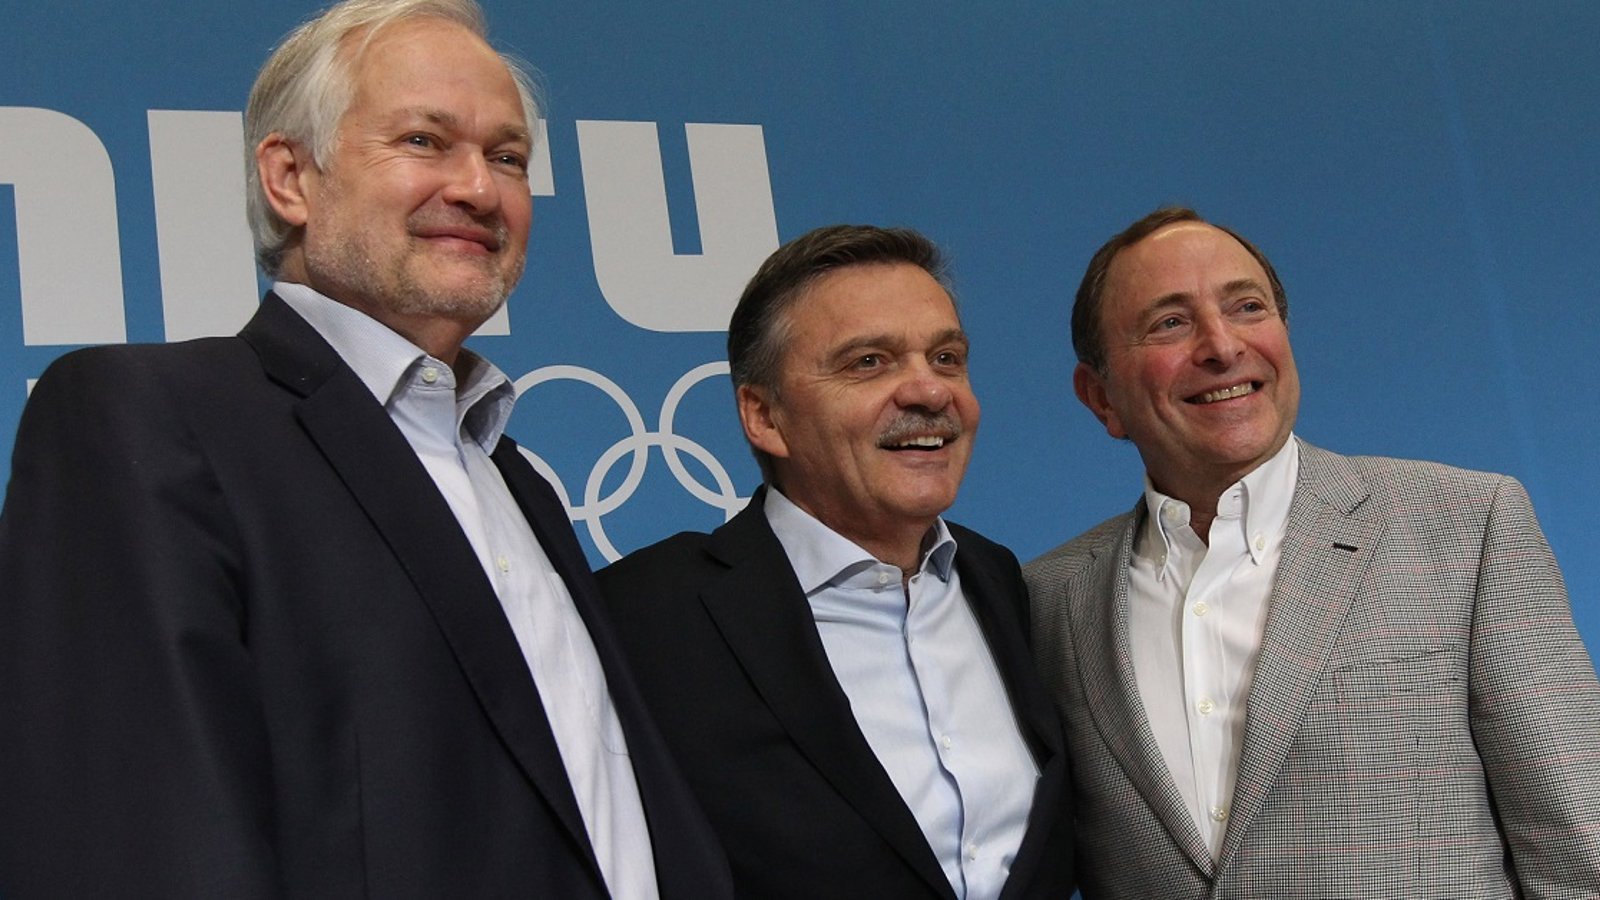 Breaking: The NHLPA has officially responded to the NHL's Olympic offer.